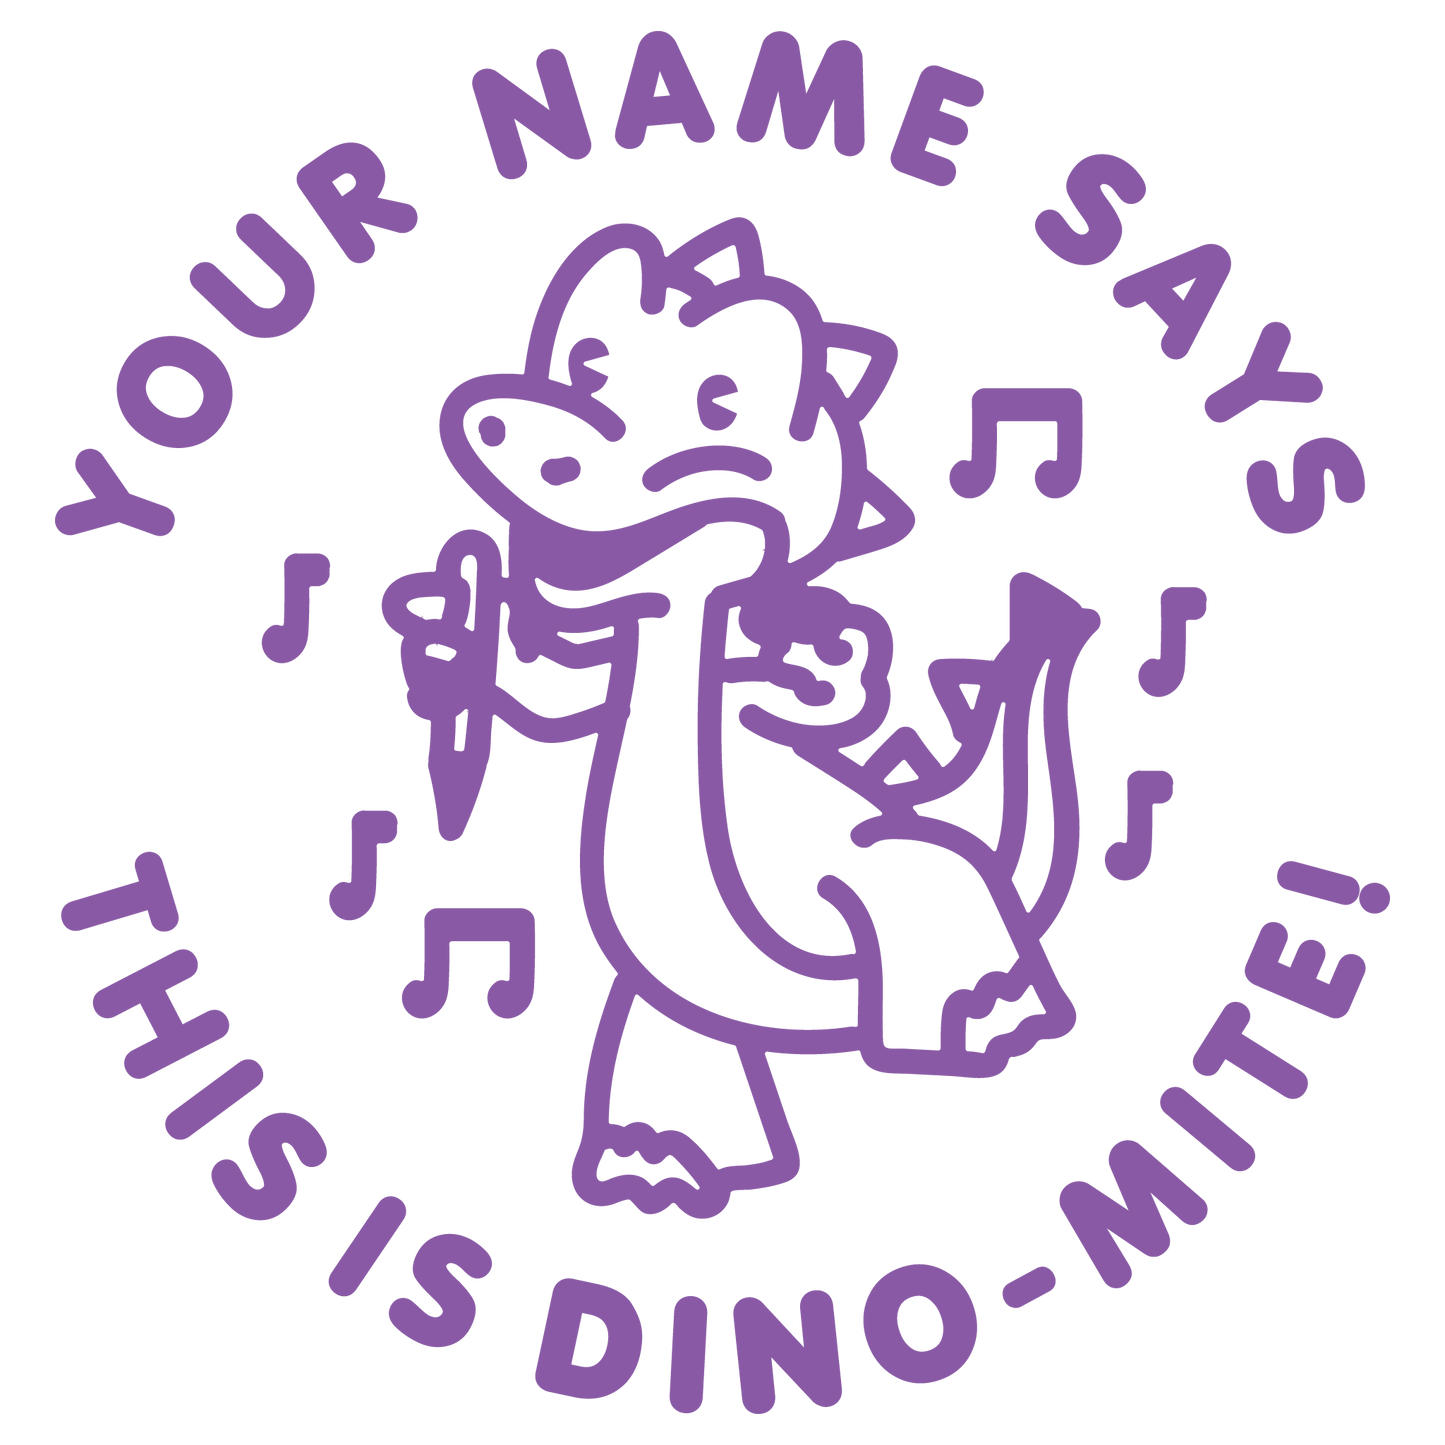 THIS IS DINOMITE CUSTOMISABLE STAMP